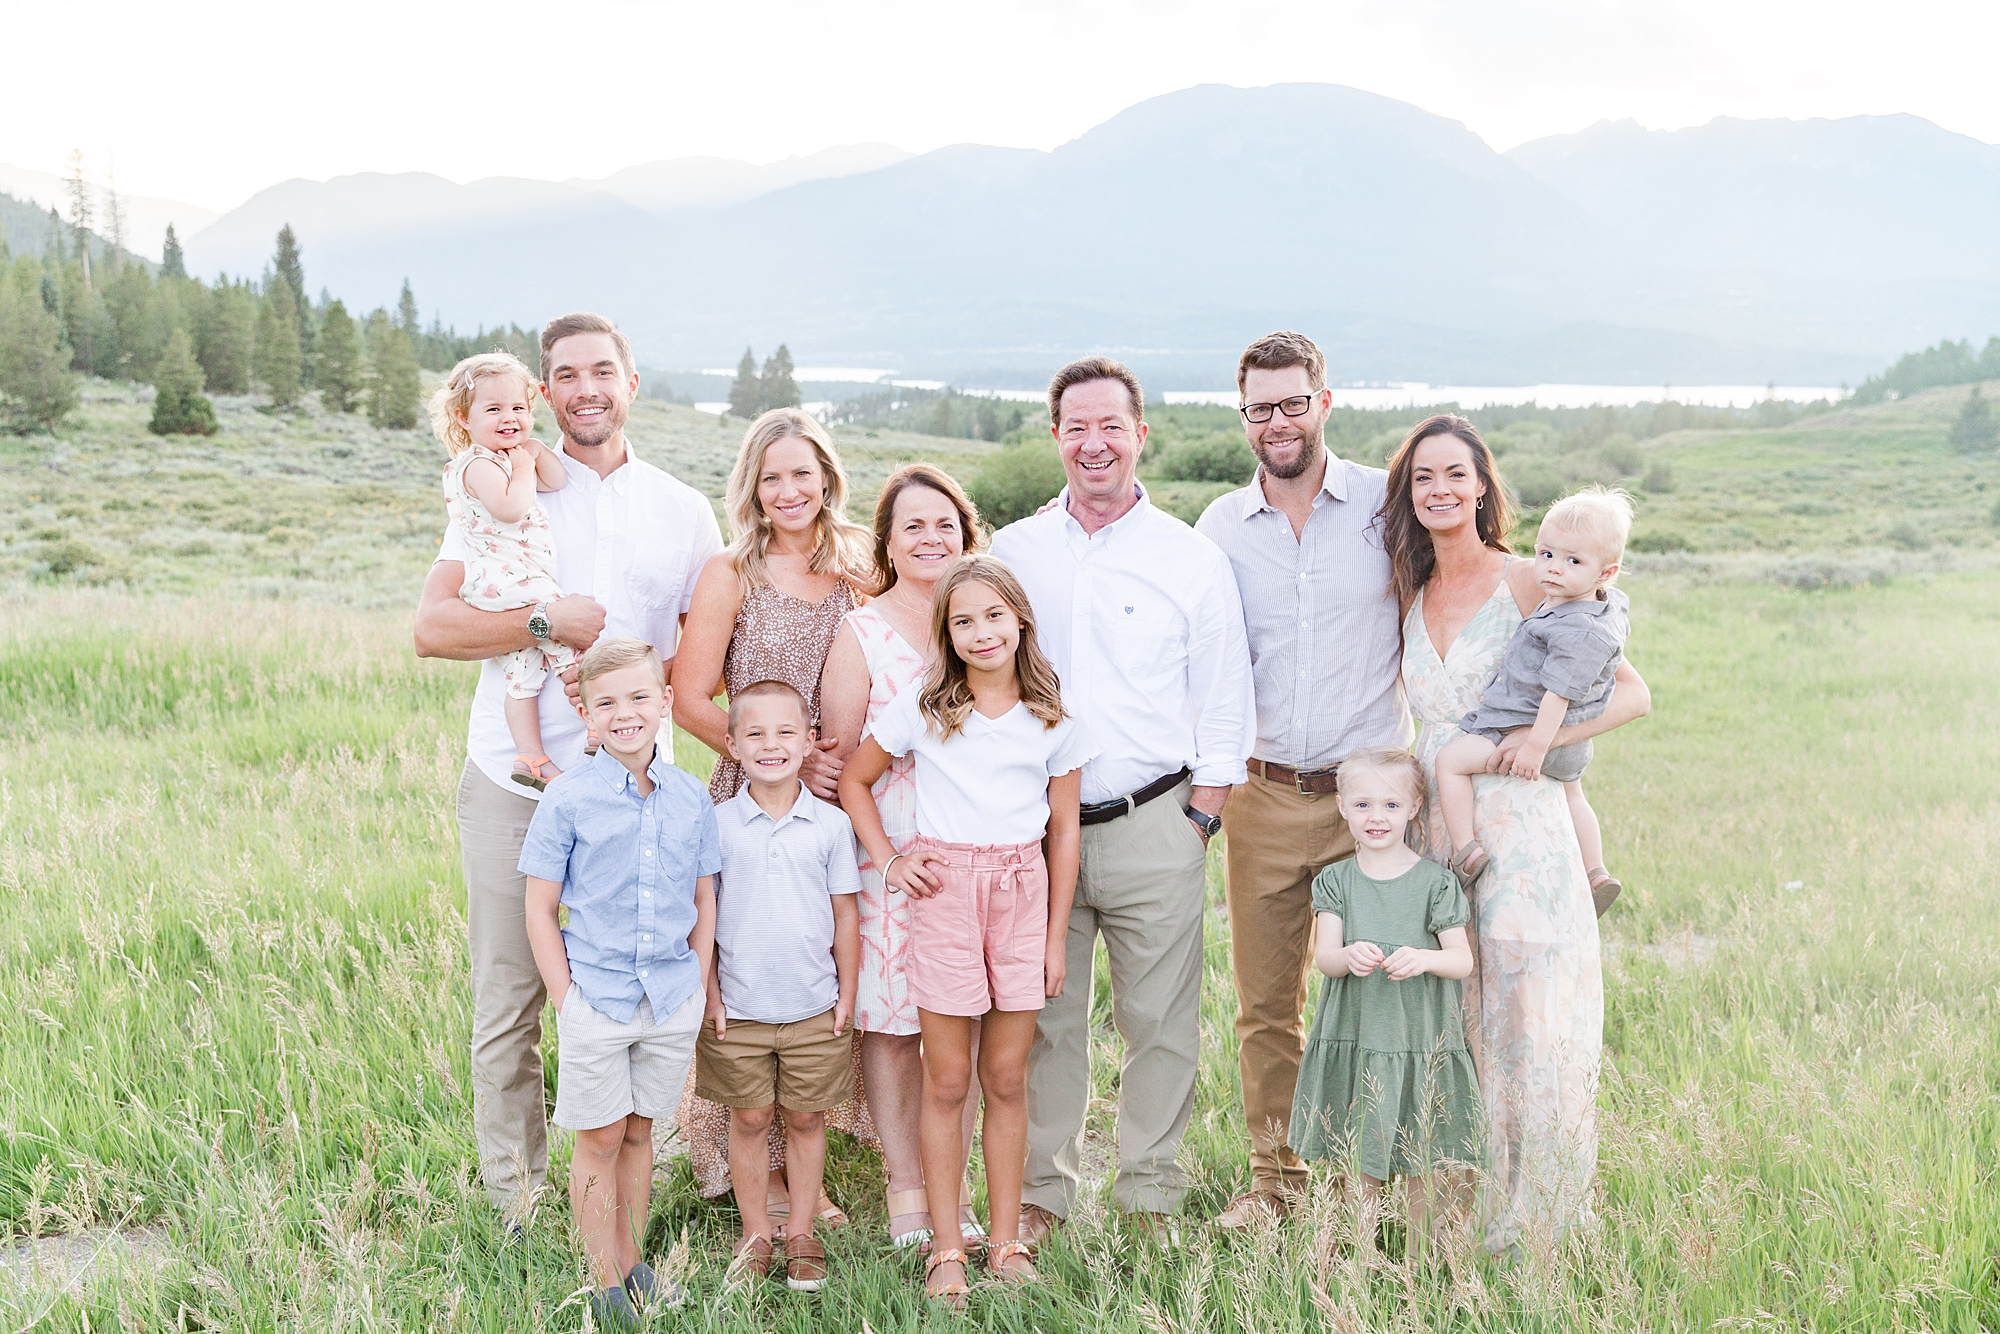 extended family session with coordinating colors and style